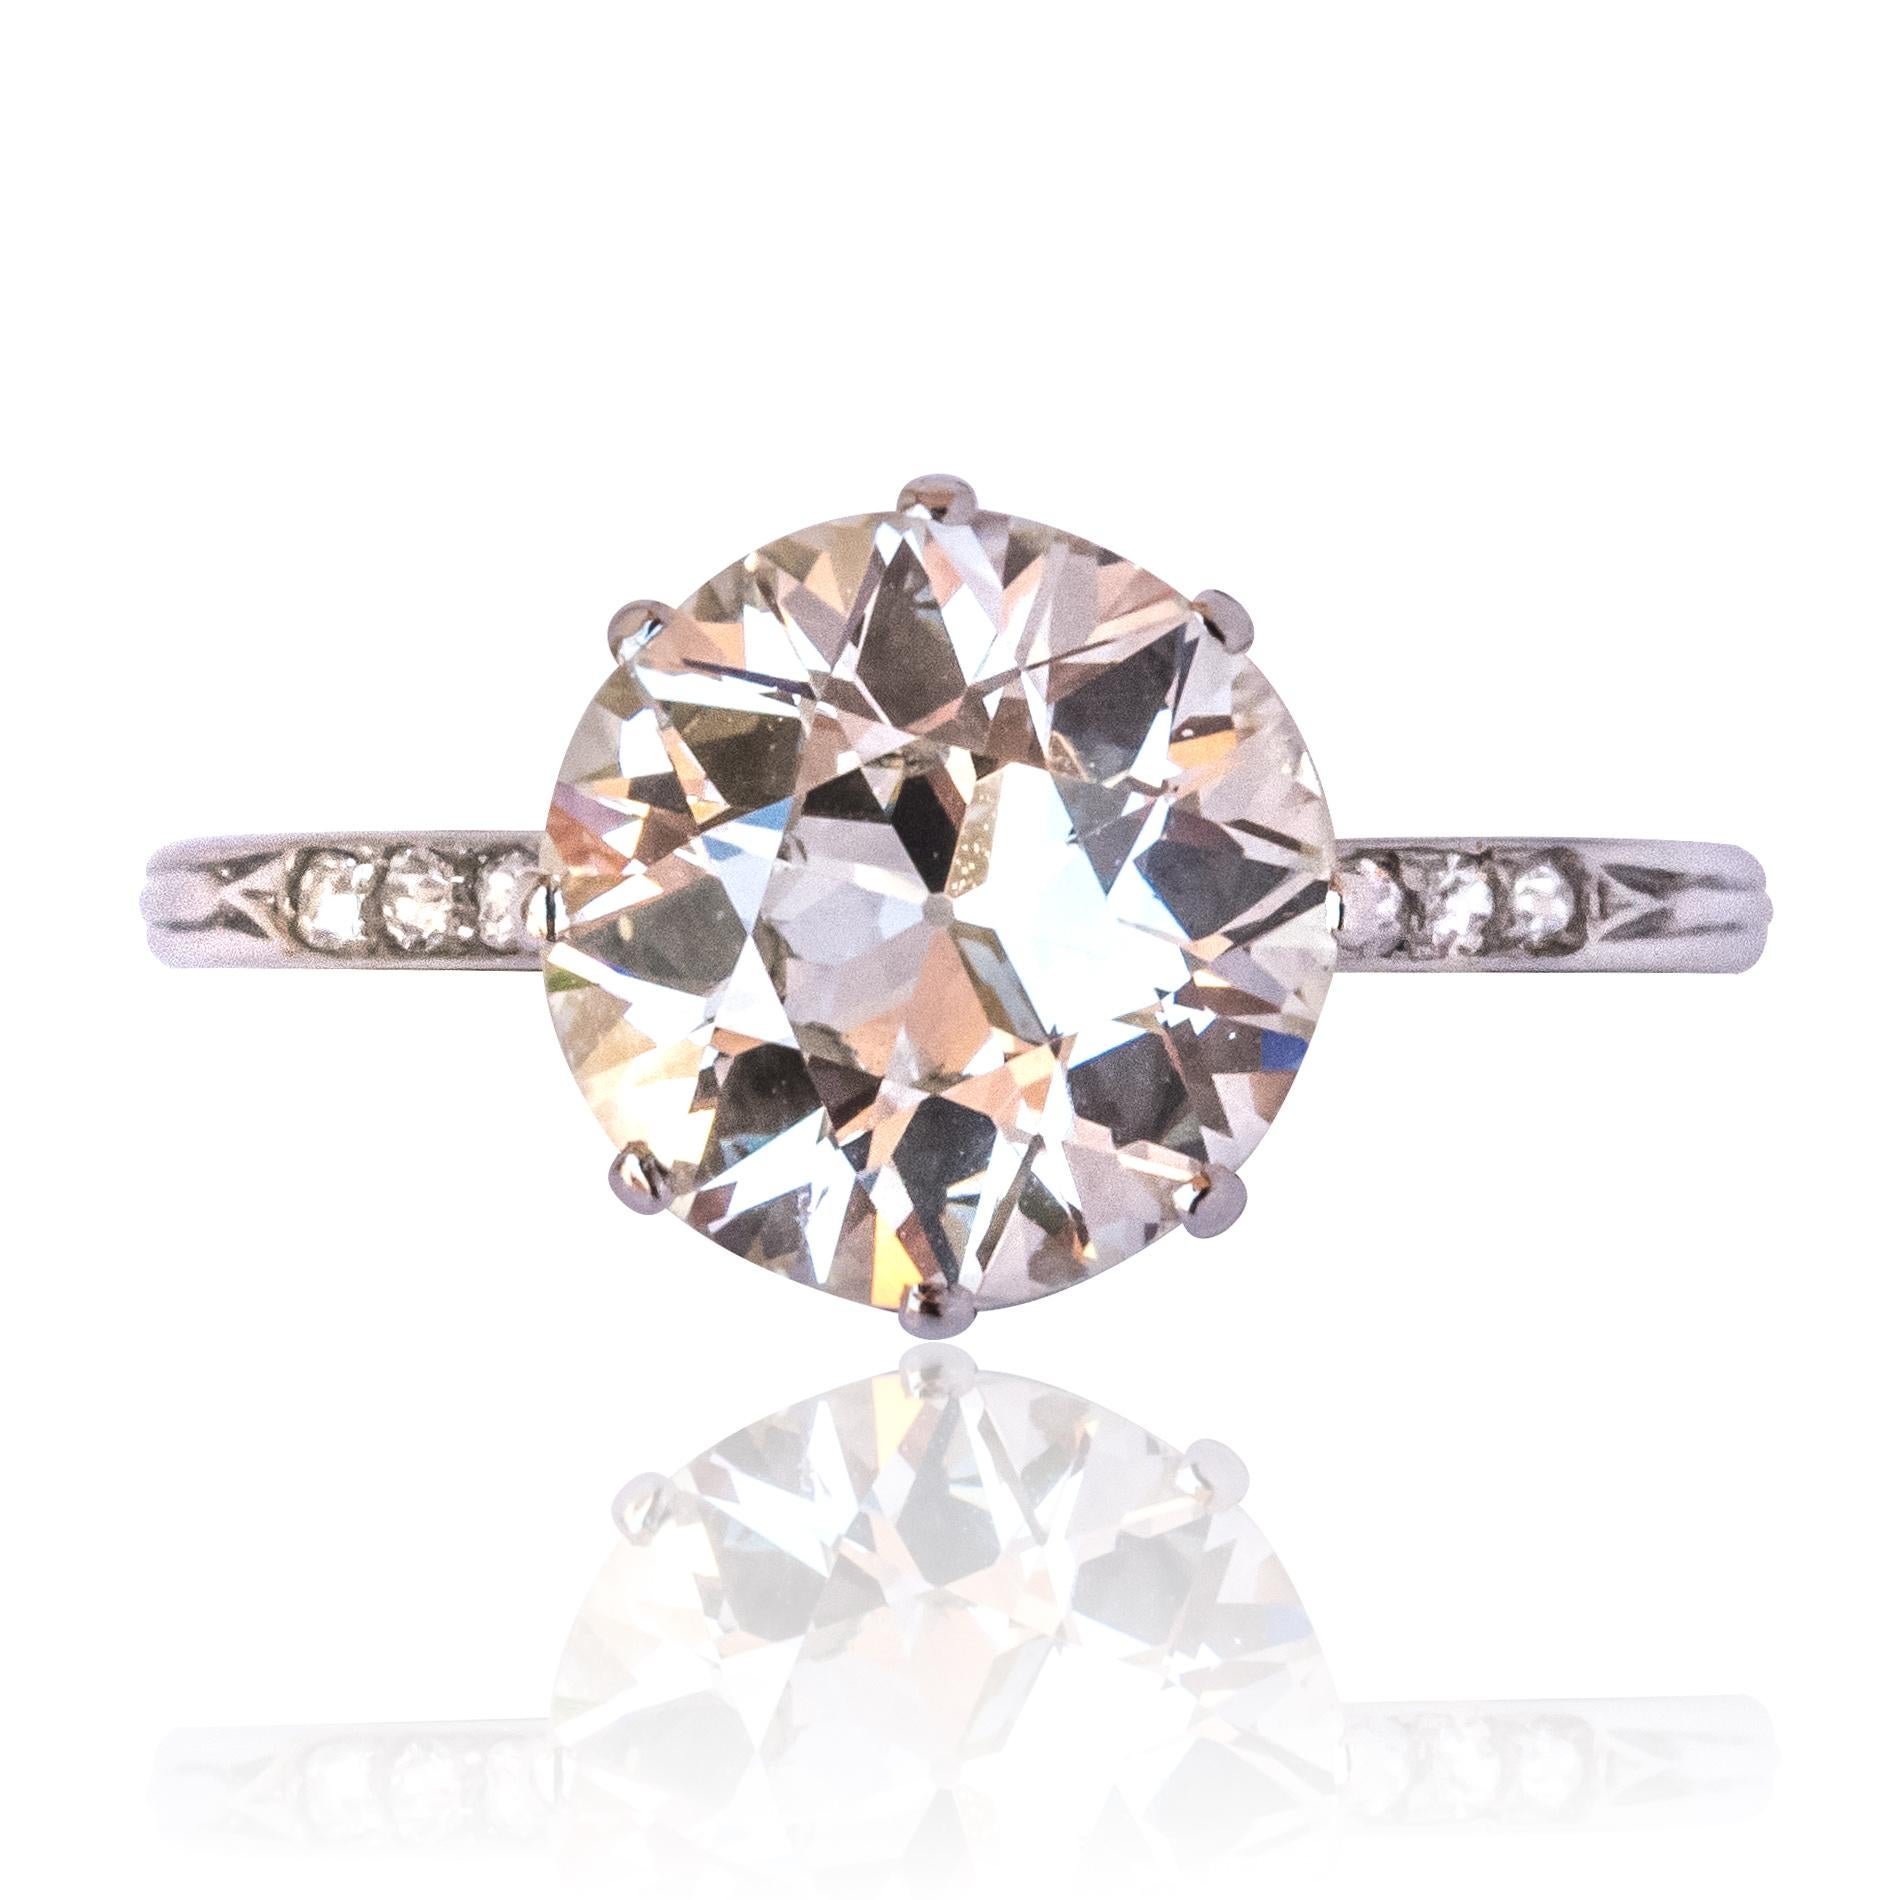 Platinum ring, dog head hallmark.
Set with an antique brilliant cut diamond of 2.45 carats on platinum, this splendid authentic solitaire ring has gone through the ages without getting a wrinkle. 4 antique brillant cut diamonds accompany the main